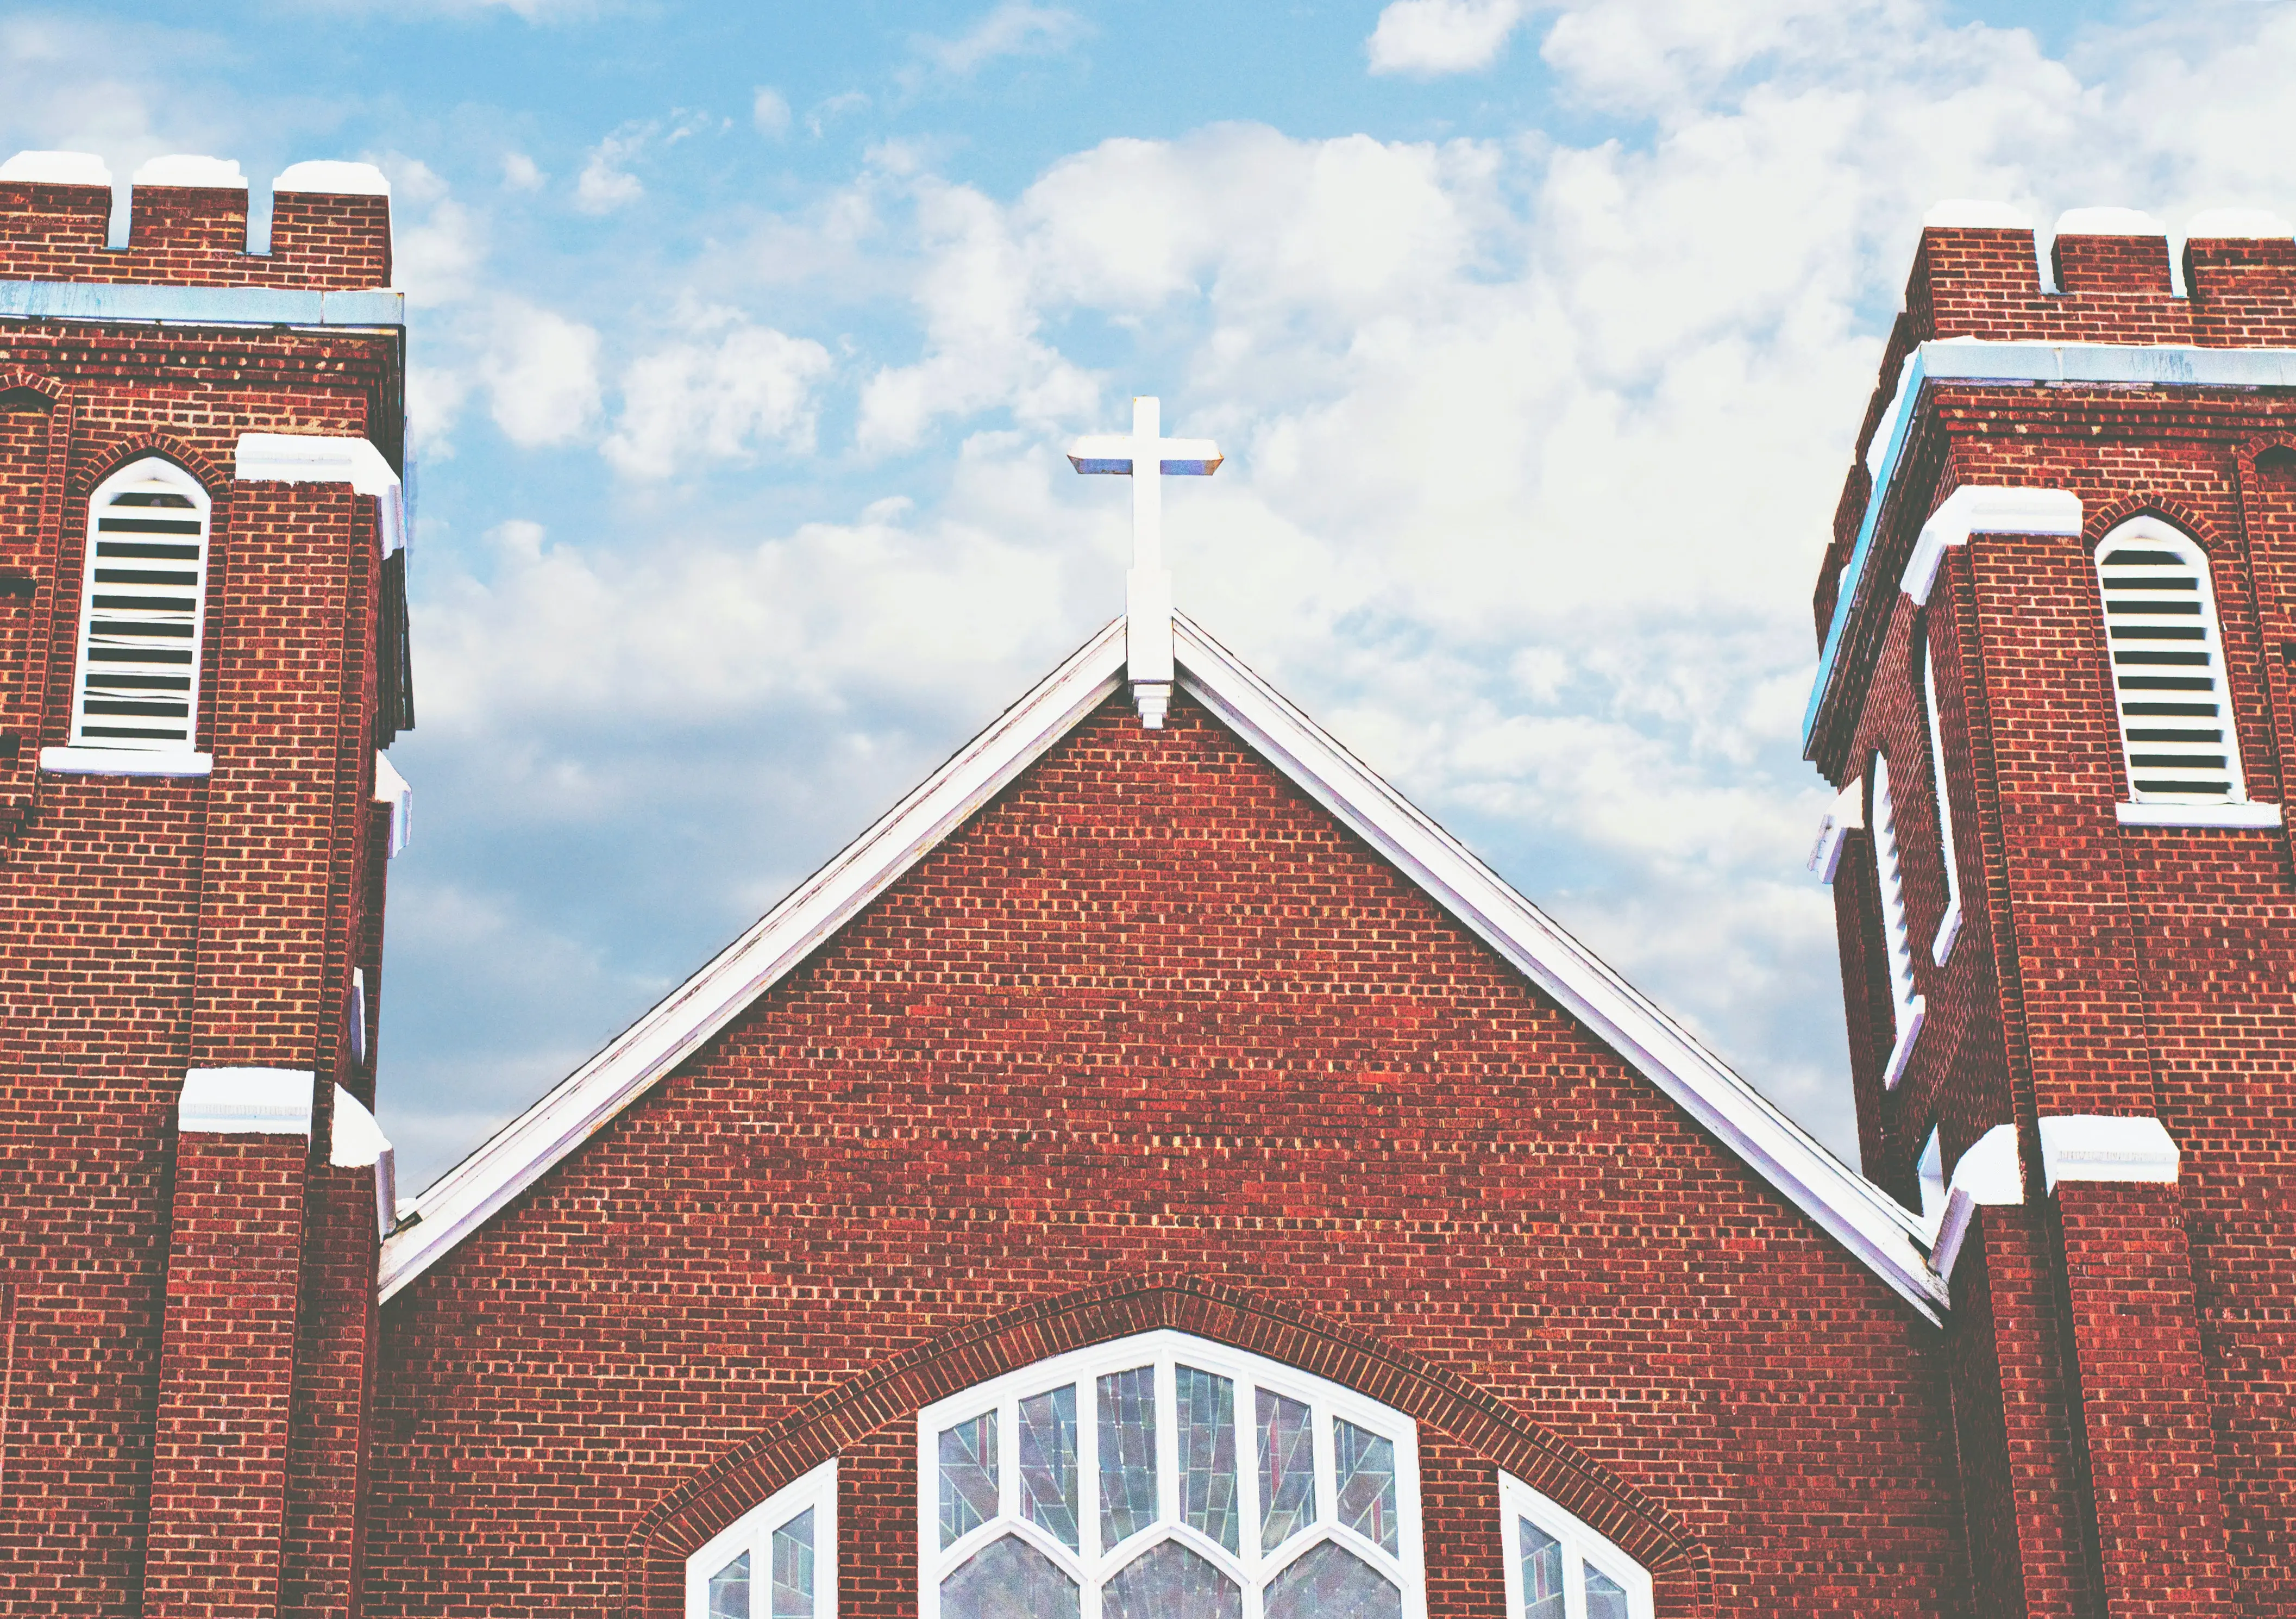 Red brick church with white cross on roof